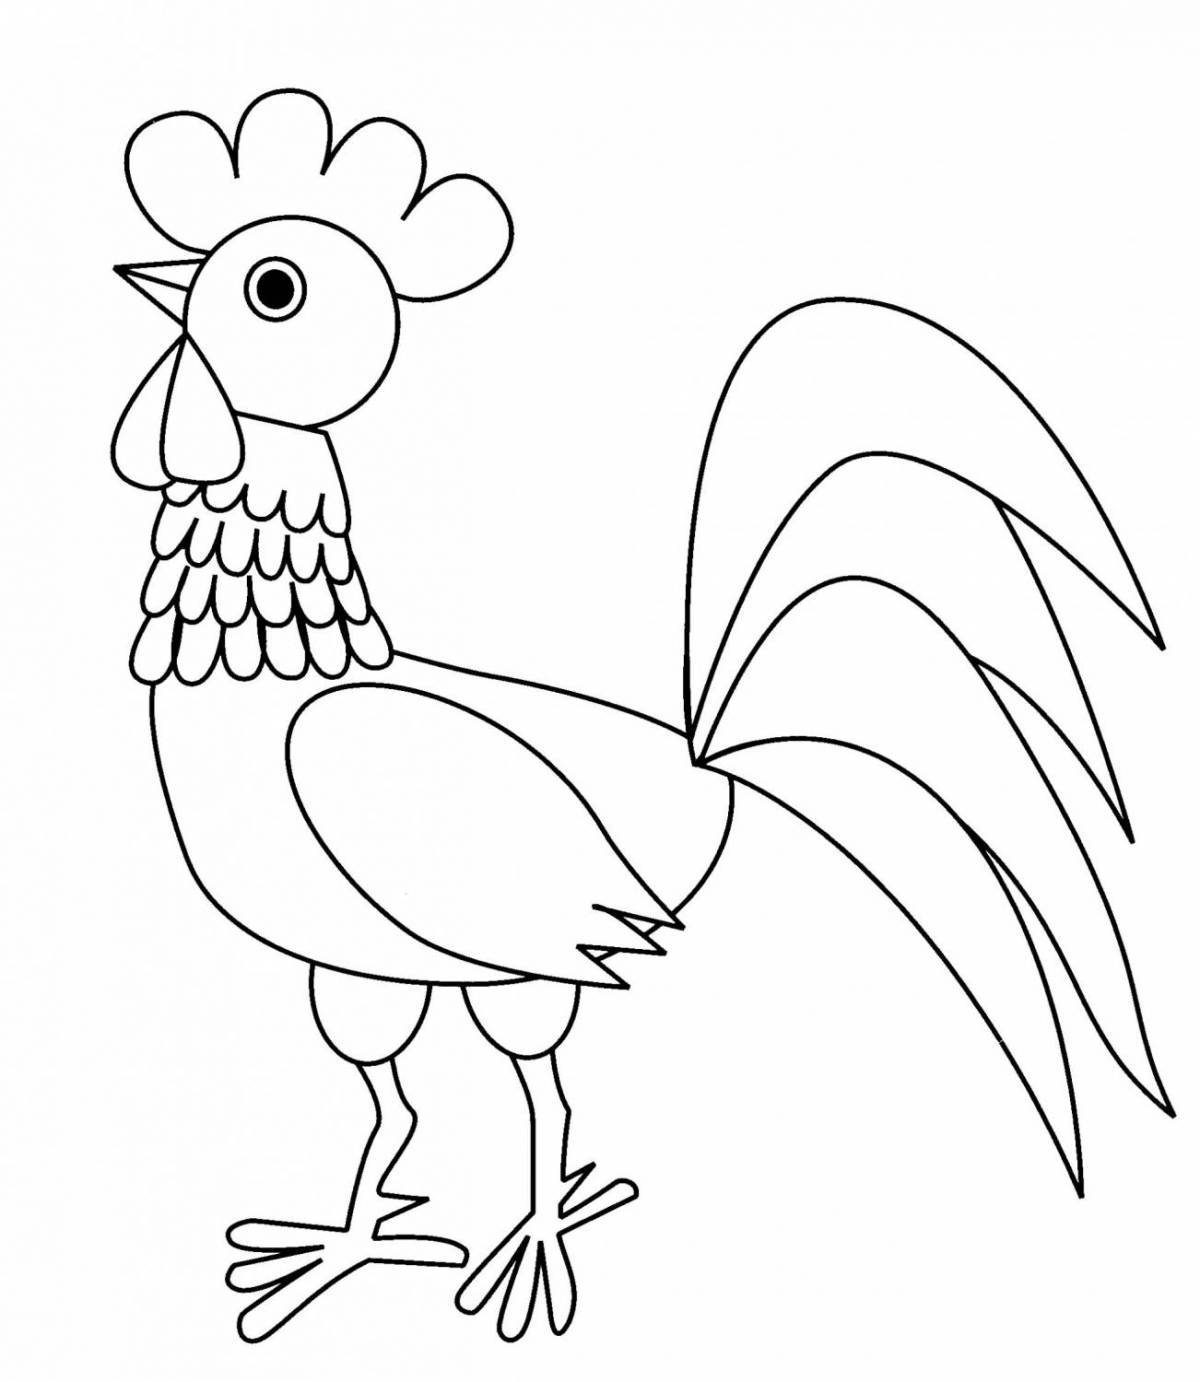 Coloring page gorgeous rooster